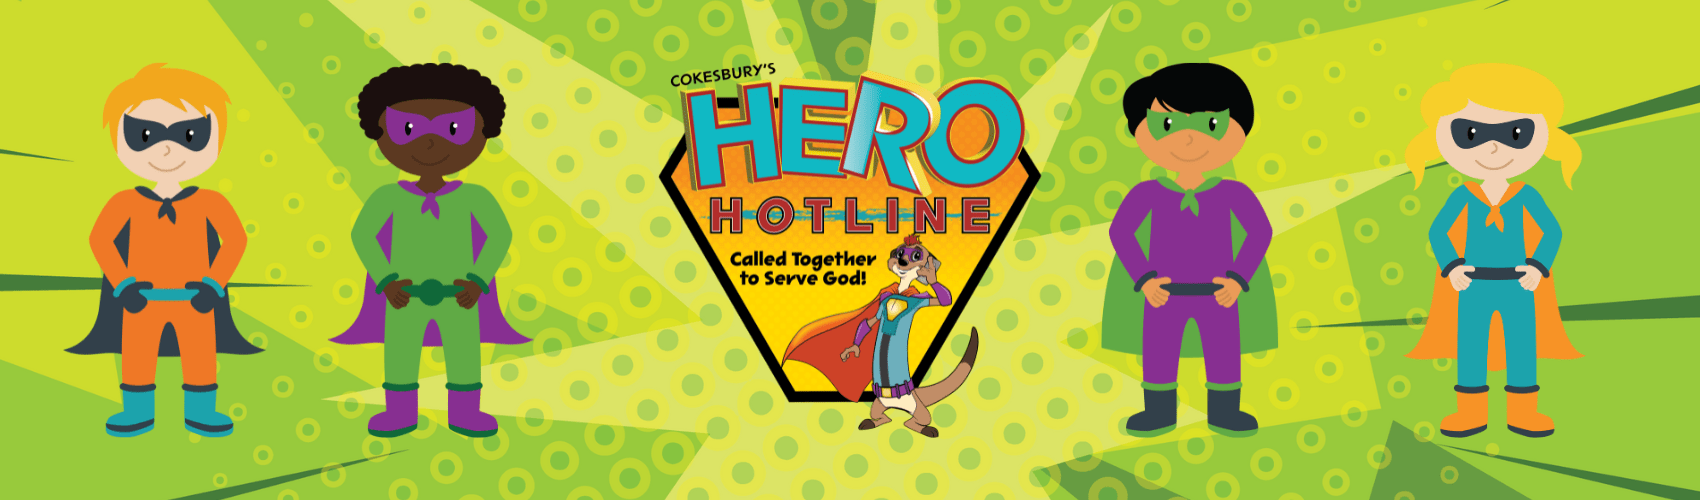 Hero Hotline VBS logo in center with children dressed in super hero costumes on both sides.